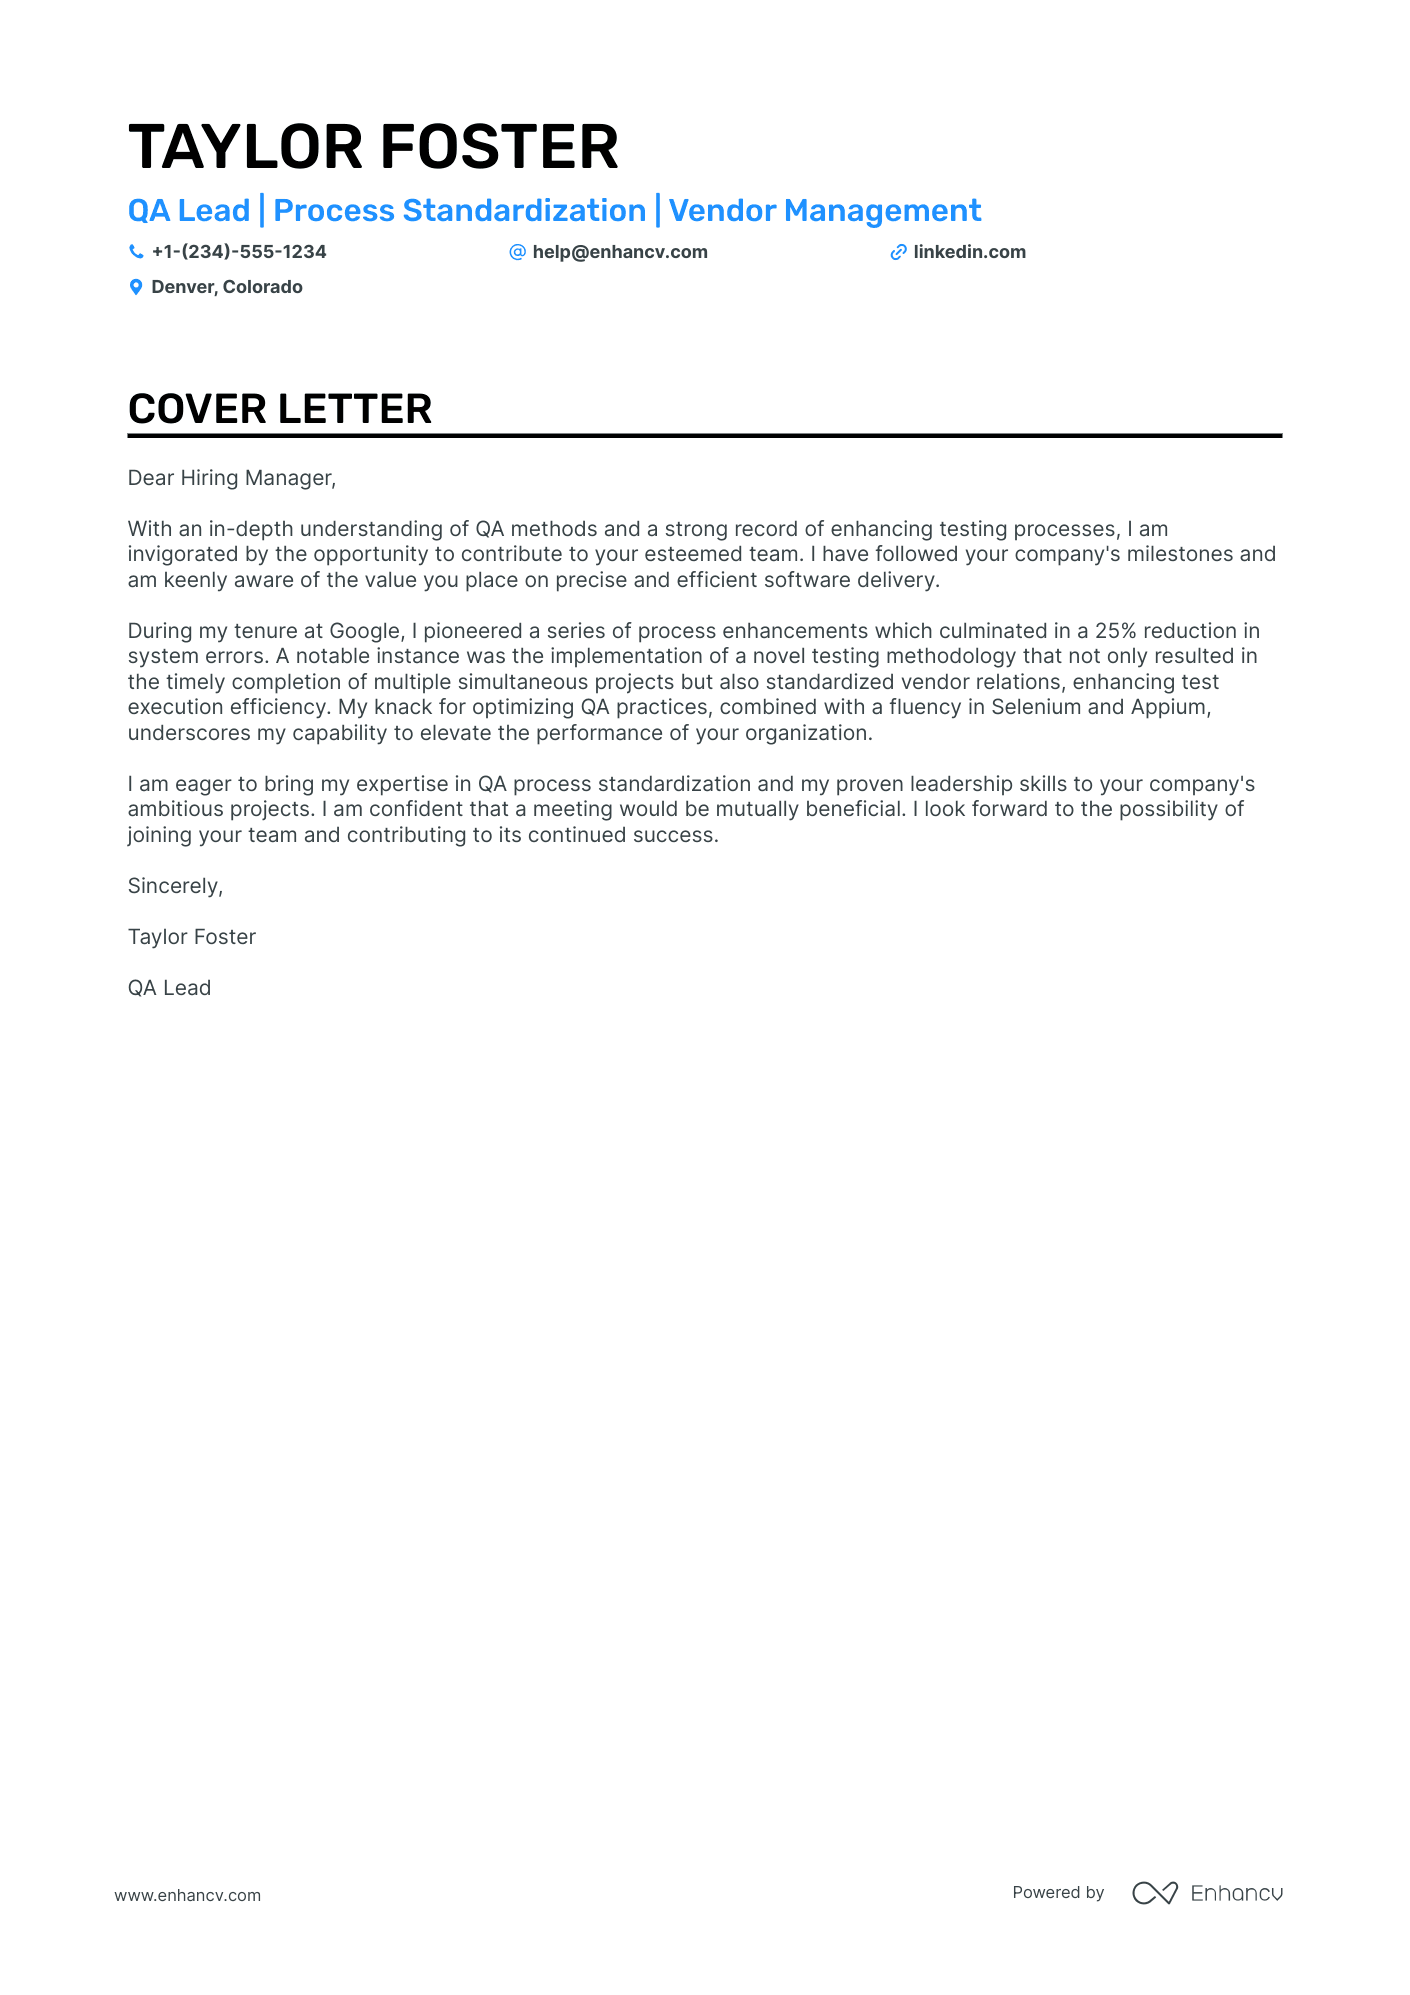 QA Lead cover letter